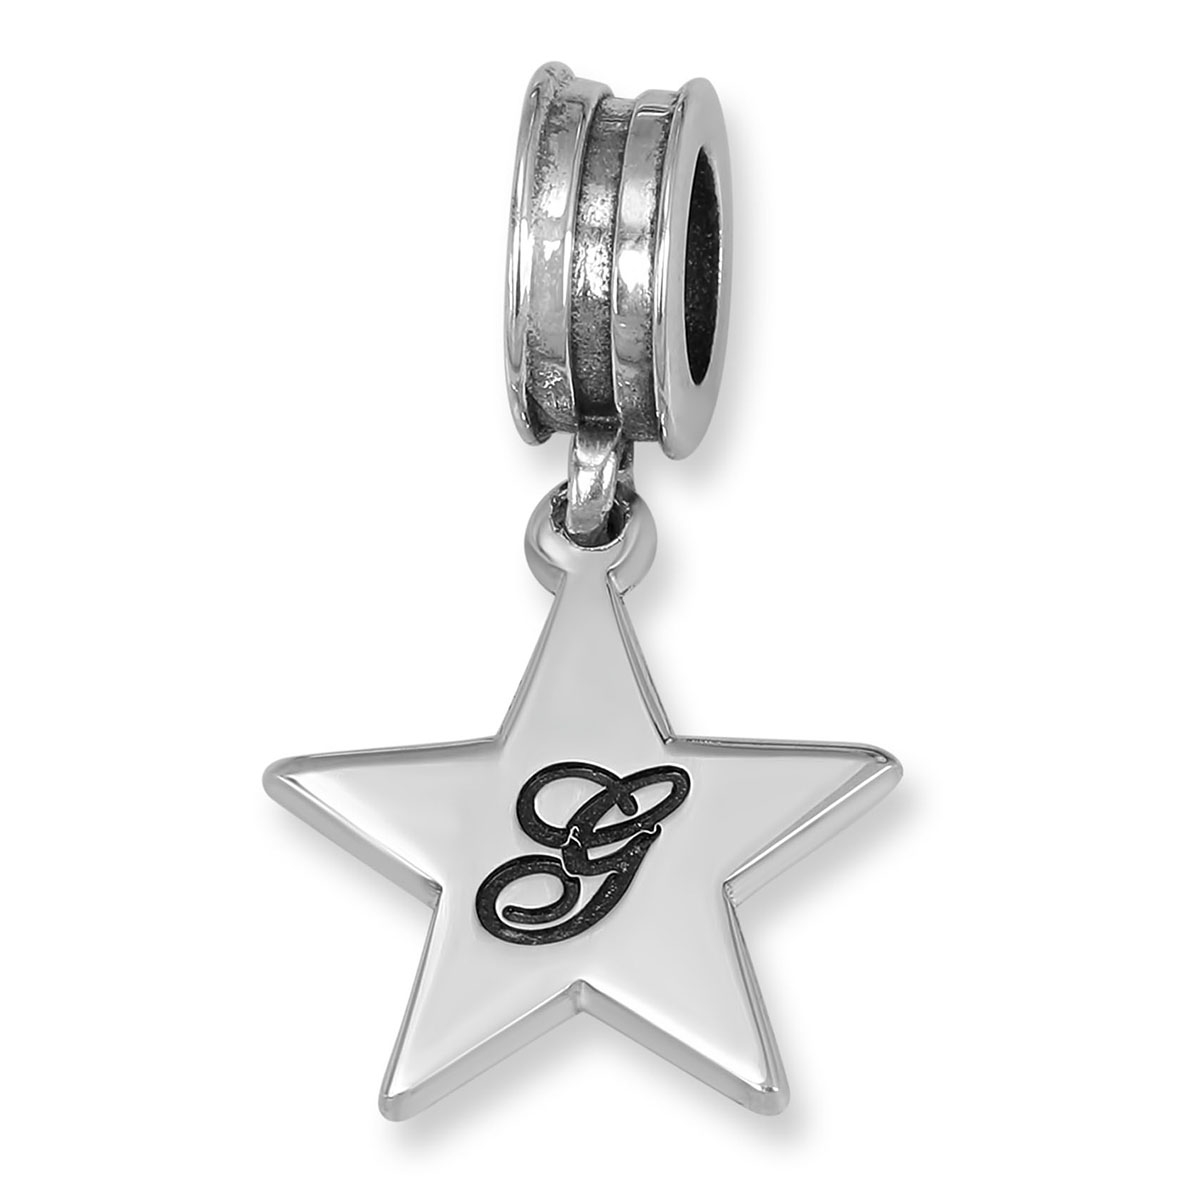 Star Sterling Silver Script Initial Charm (English / Hebrew)  - 1